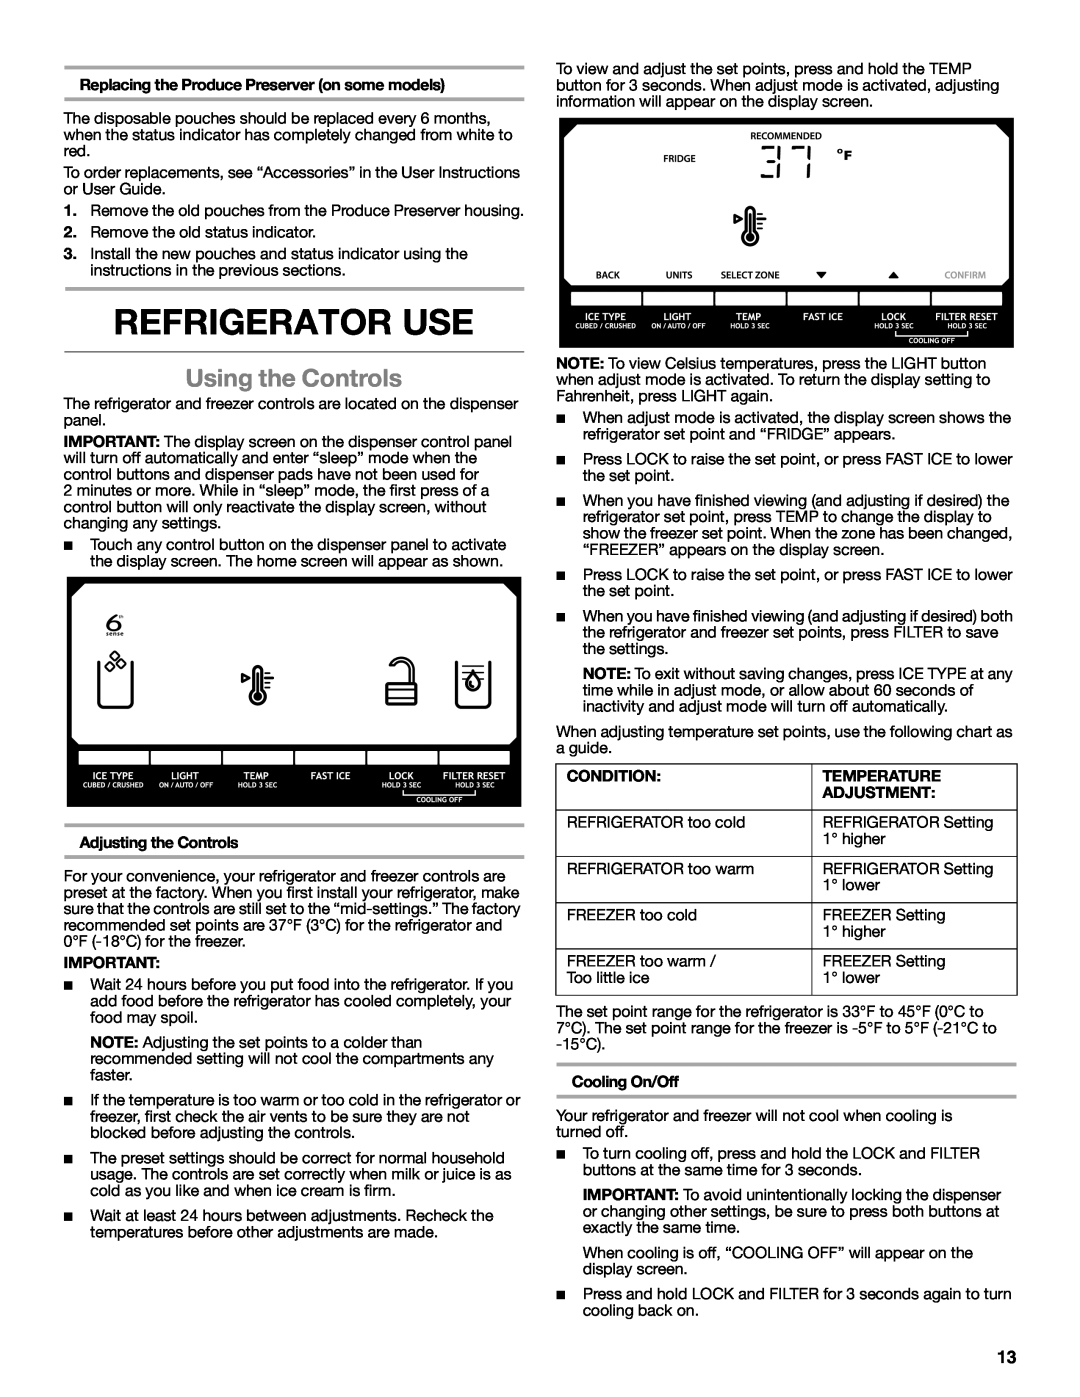 Whirlpool W10632883A installation instructions Refrigerator Use, Using the Controls 